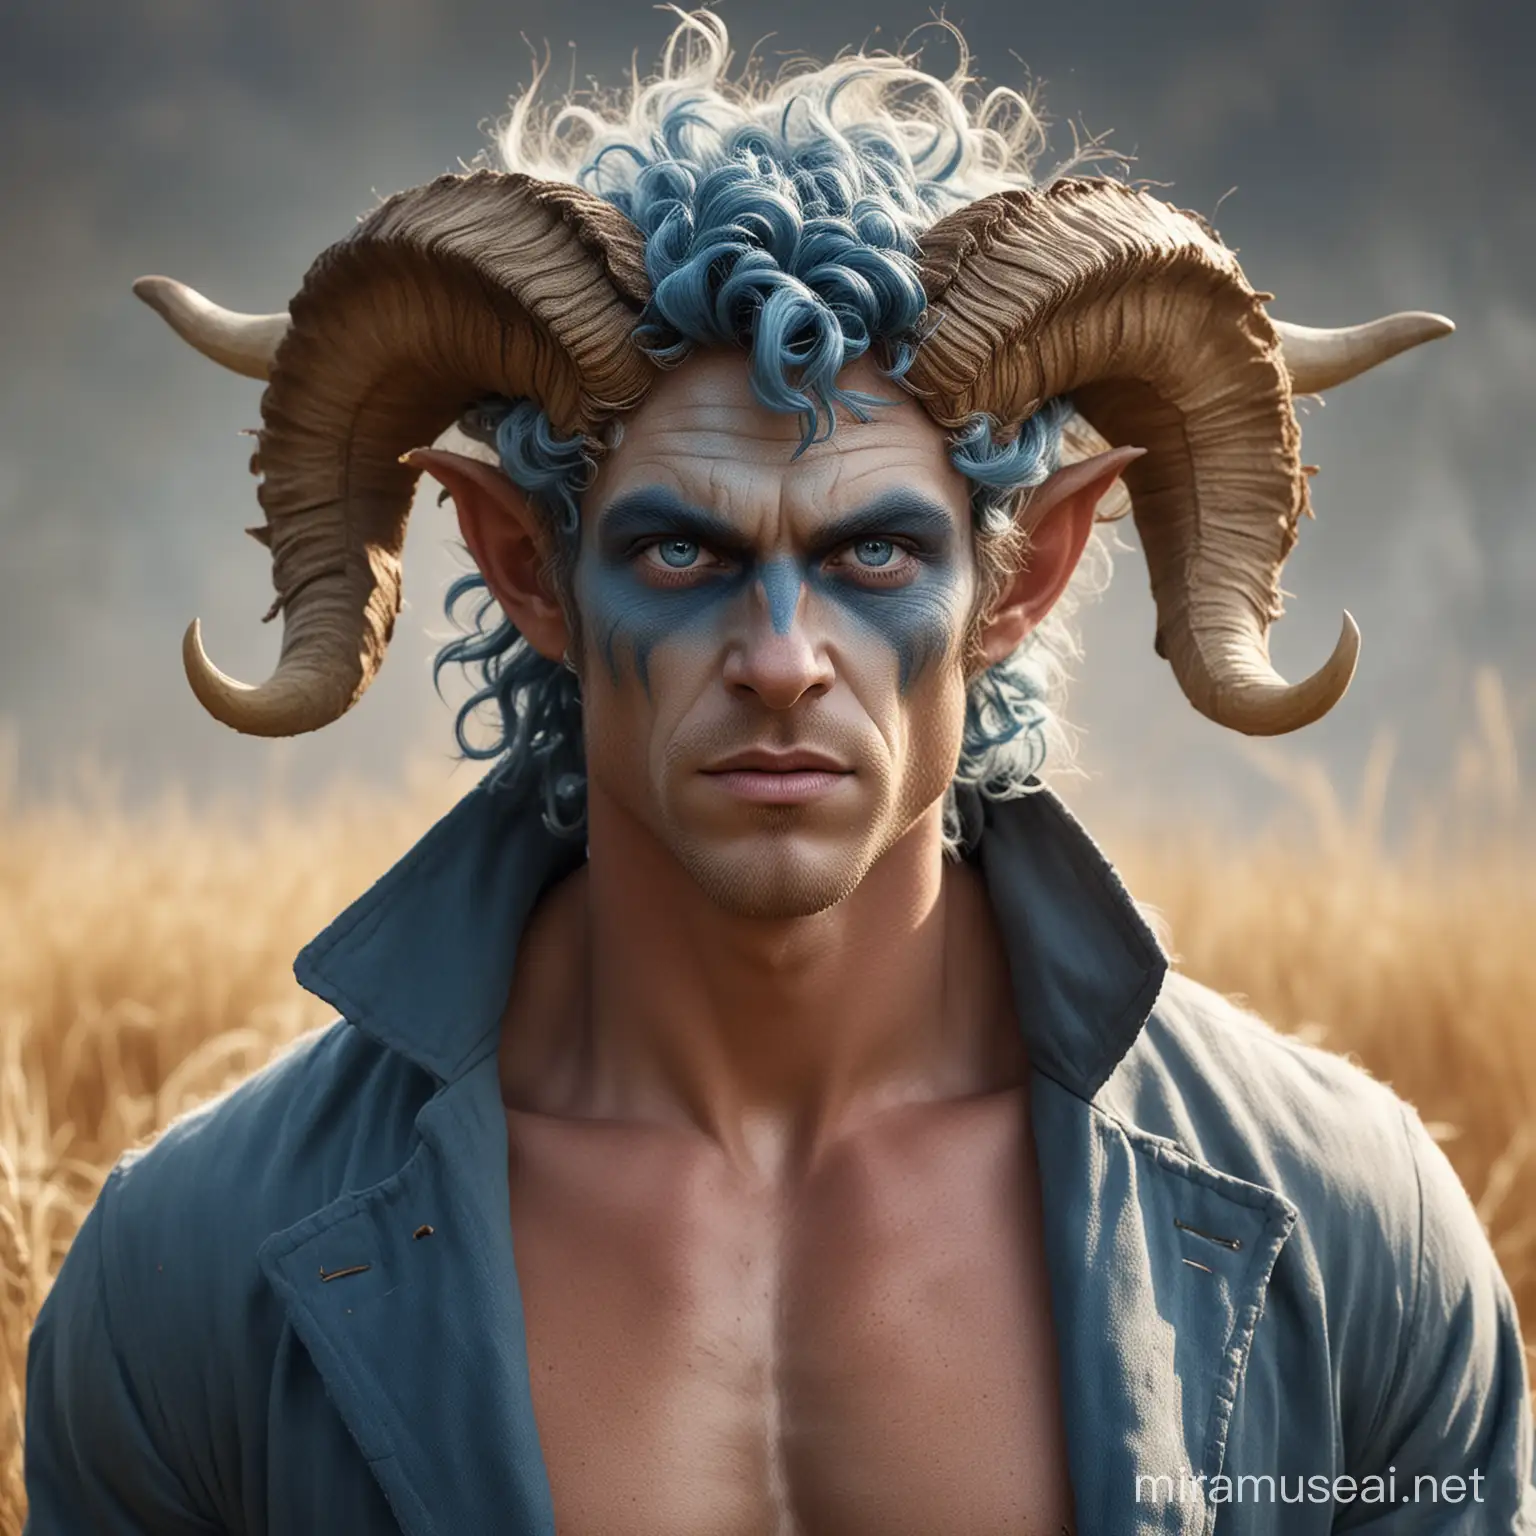 A very muscular mythical faun man with a back-curled horns, a sunburned face, large blue eyes, straw hair, he wears modest blue coat of a farmer, fantasy appearance